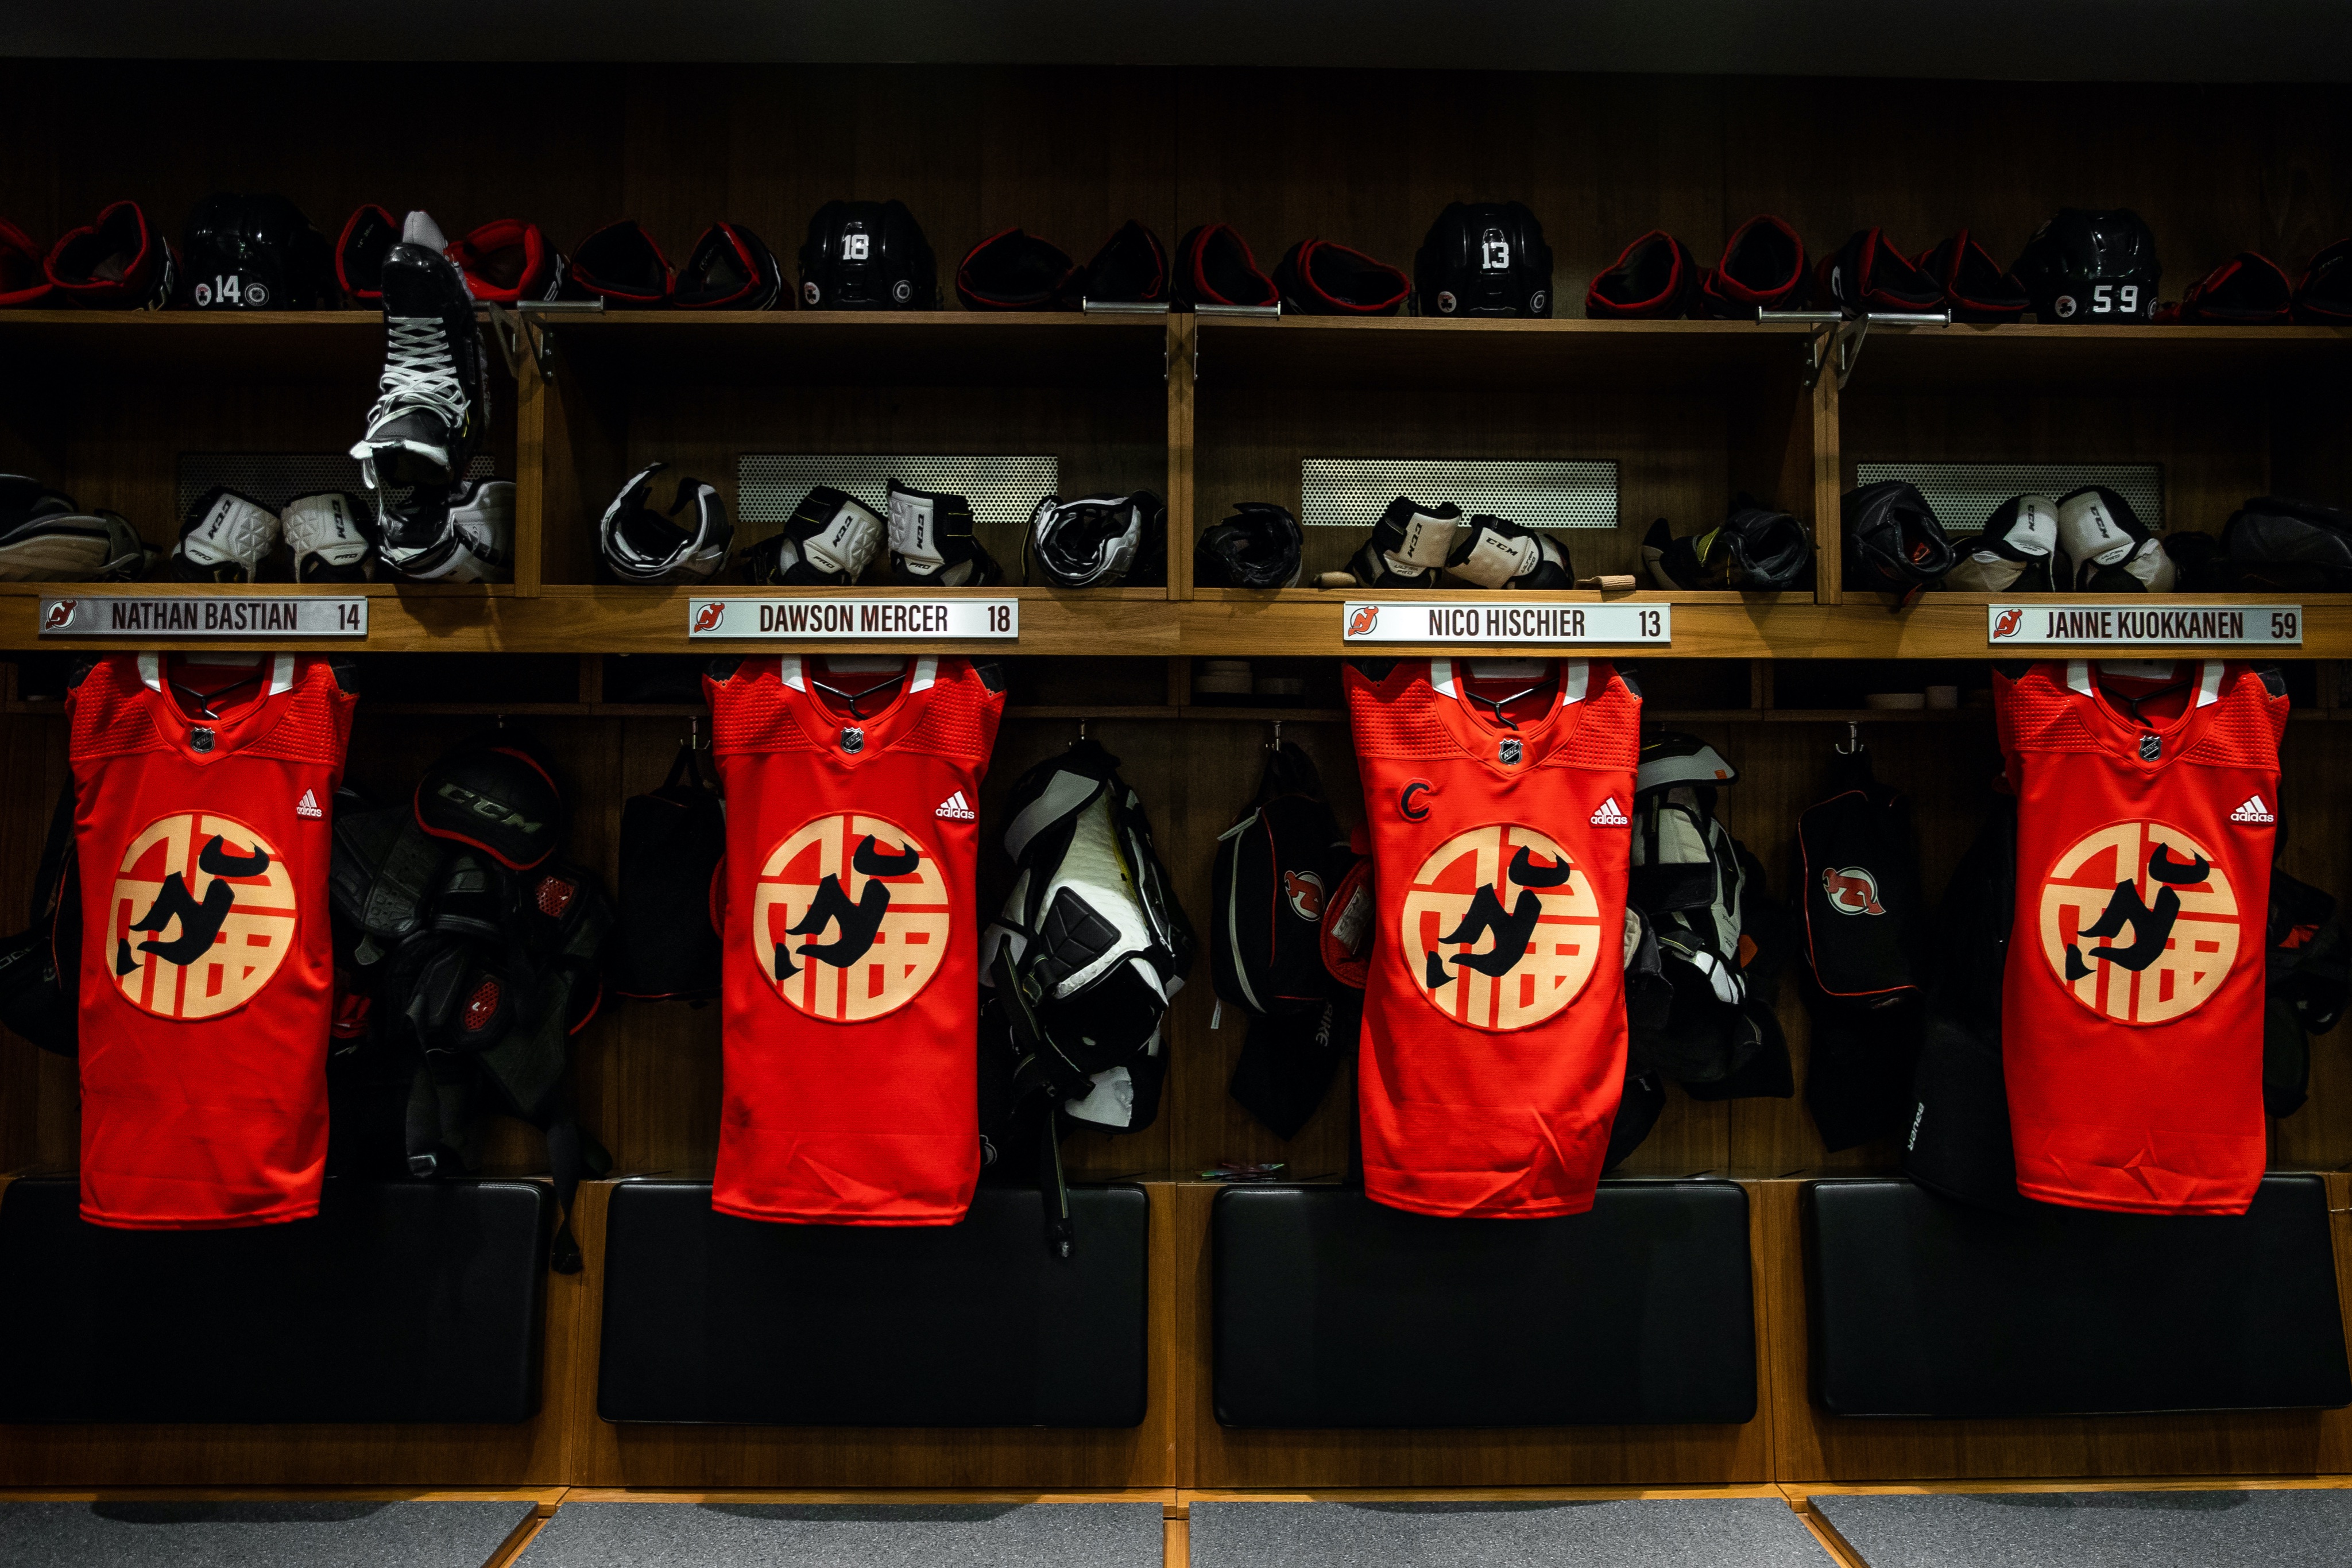 new jersey devils lunar new year jersey